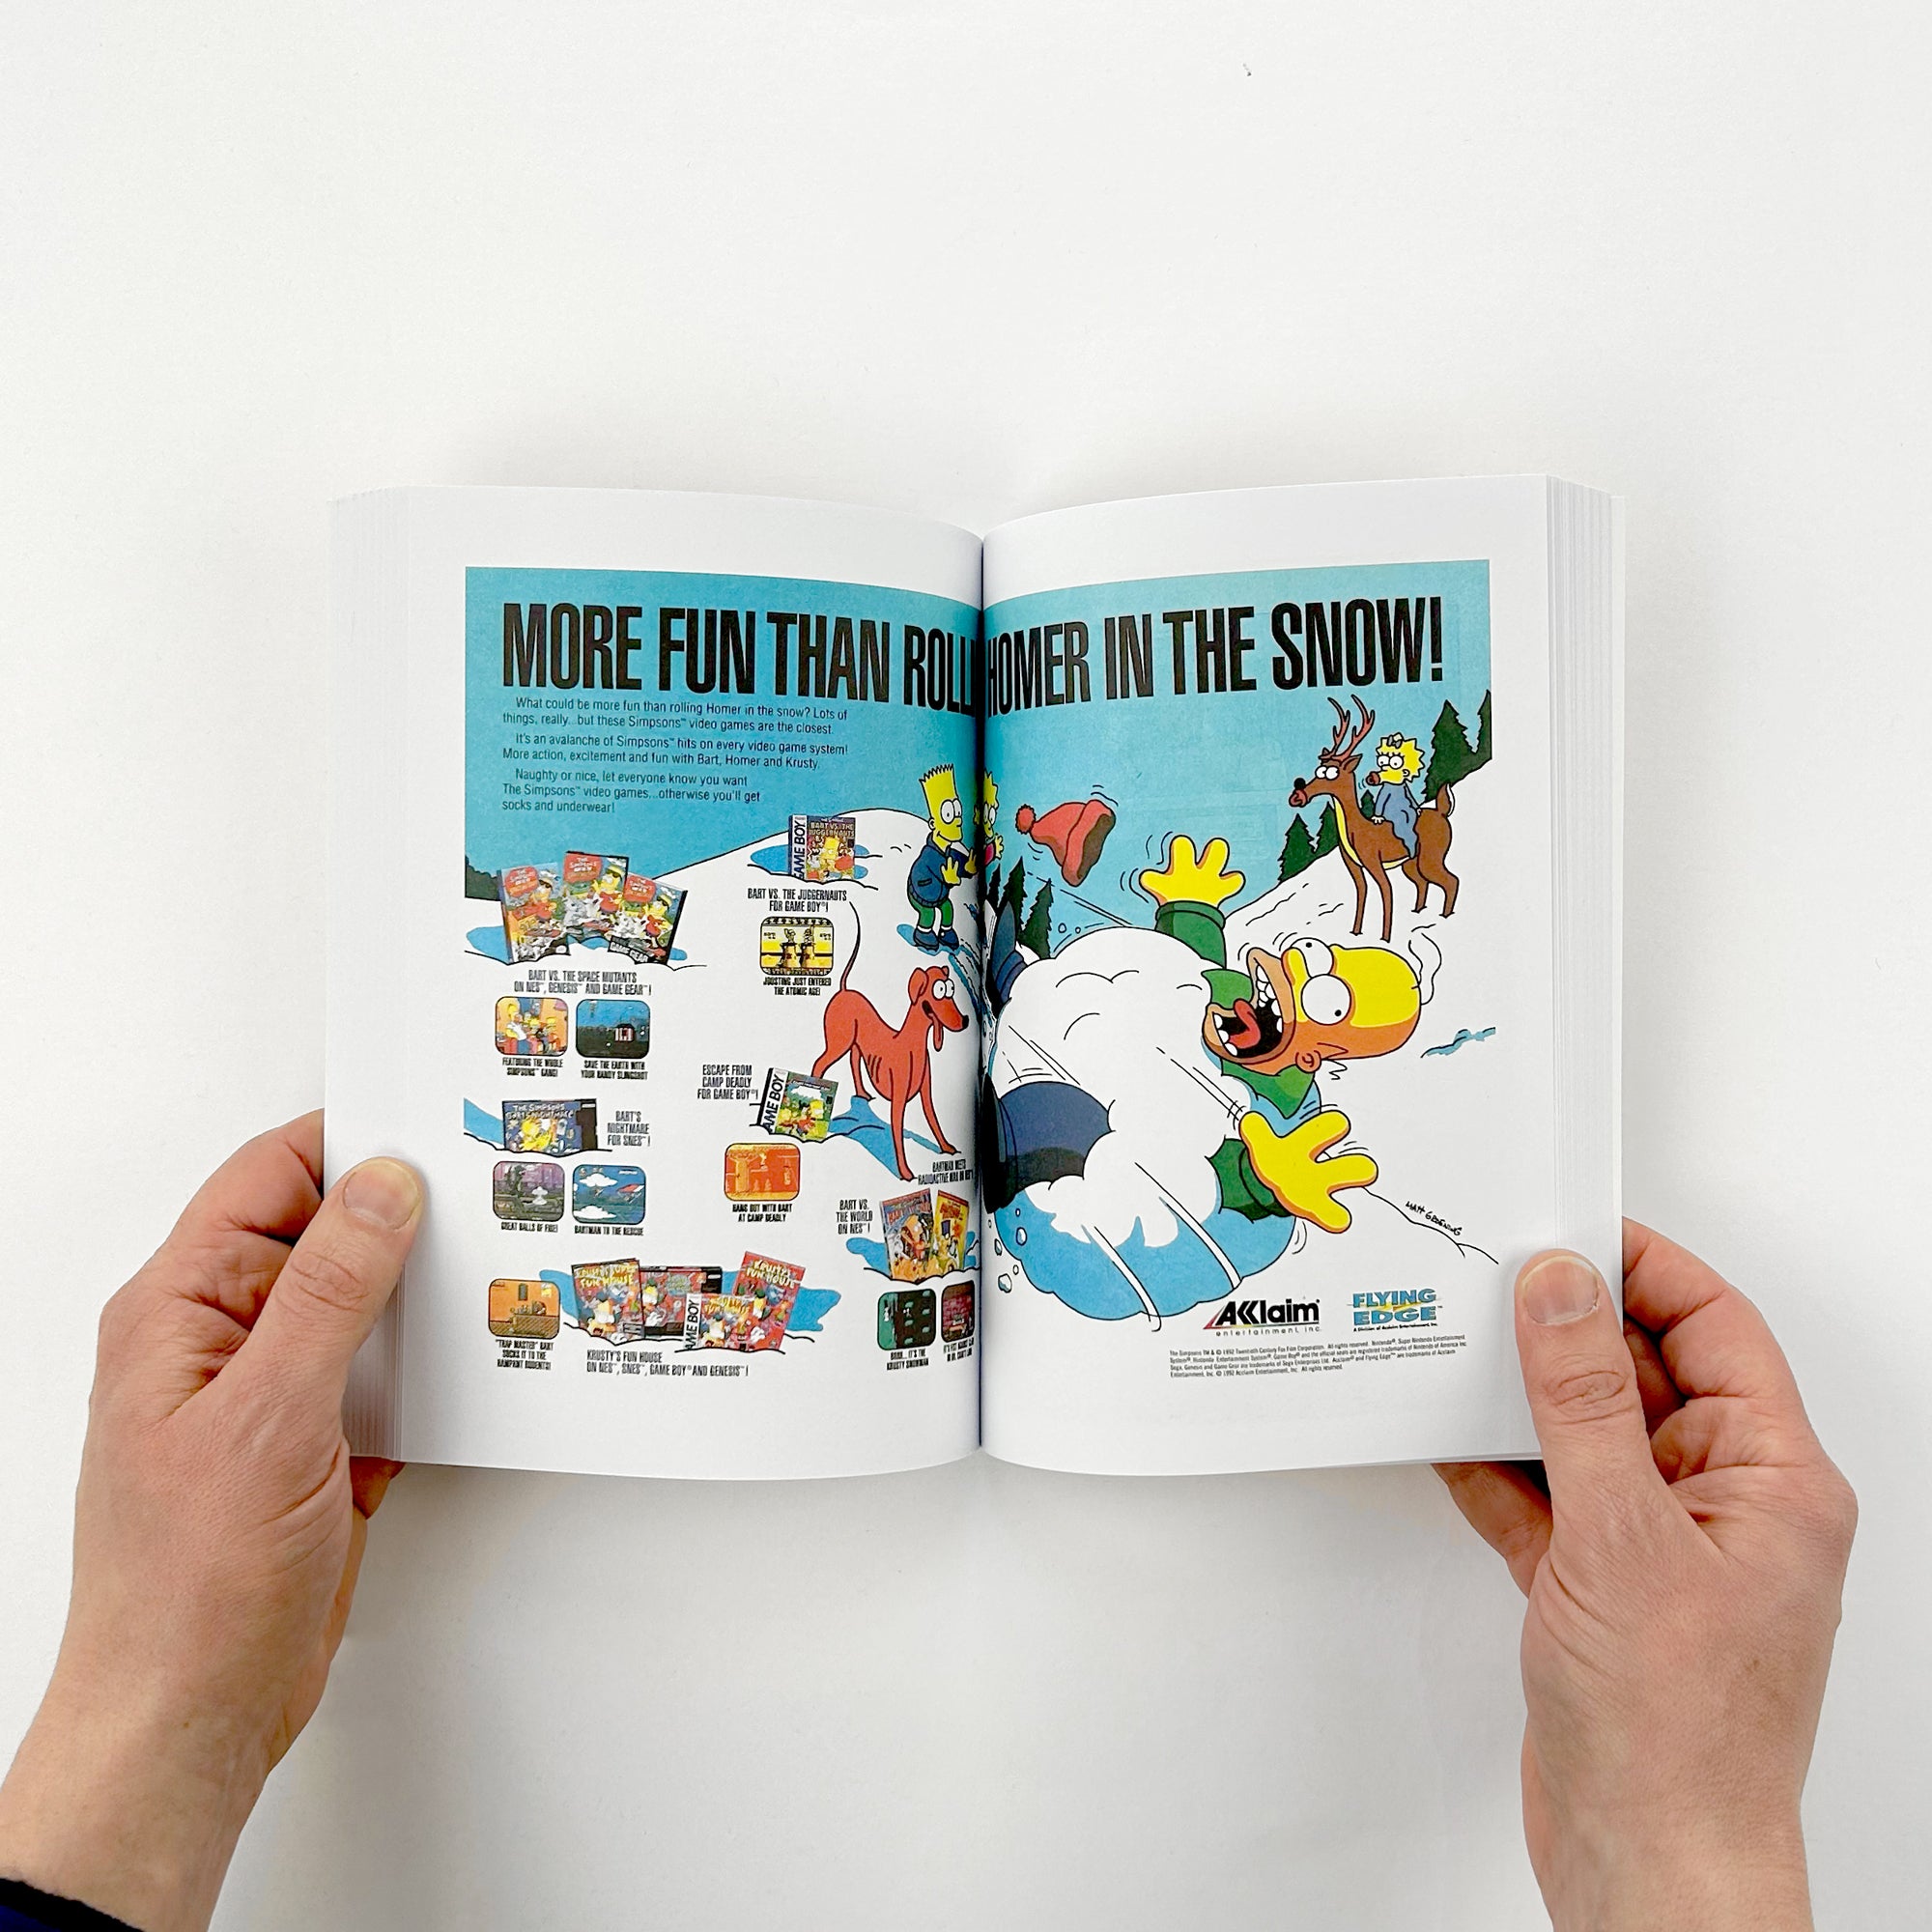 A Compendium of Print Advertising from The Simpsons